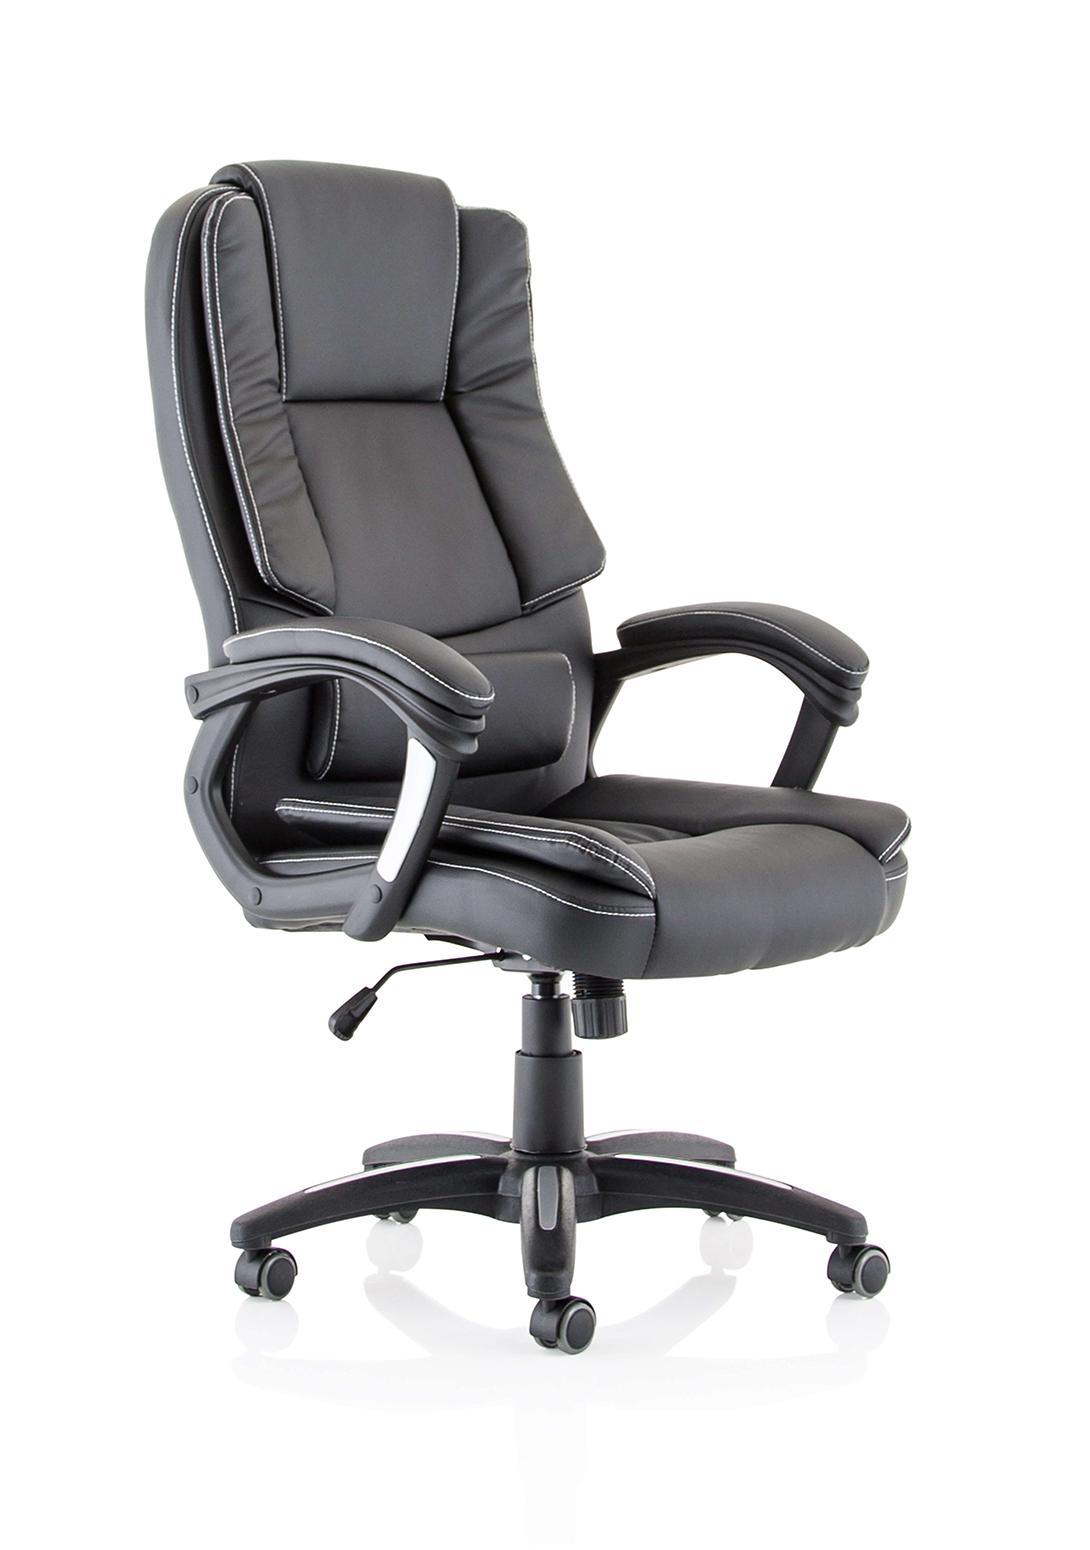 Dakota High Back Black Leather Executive Office Chair with Arms